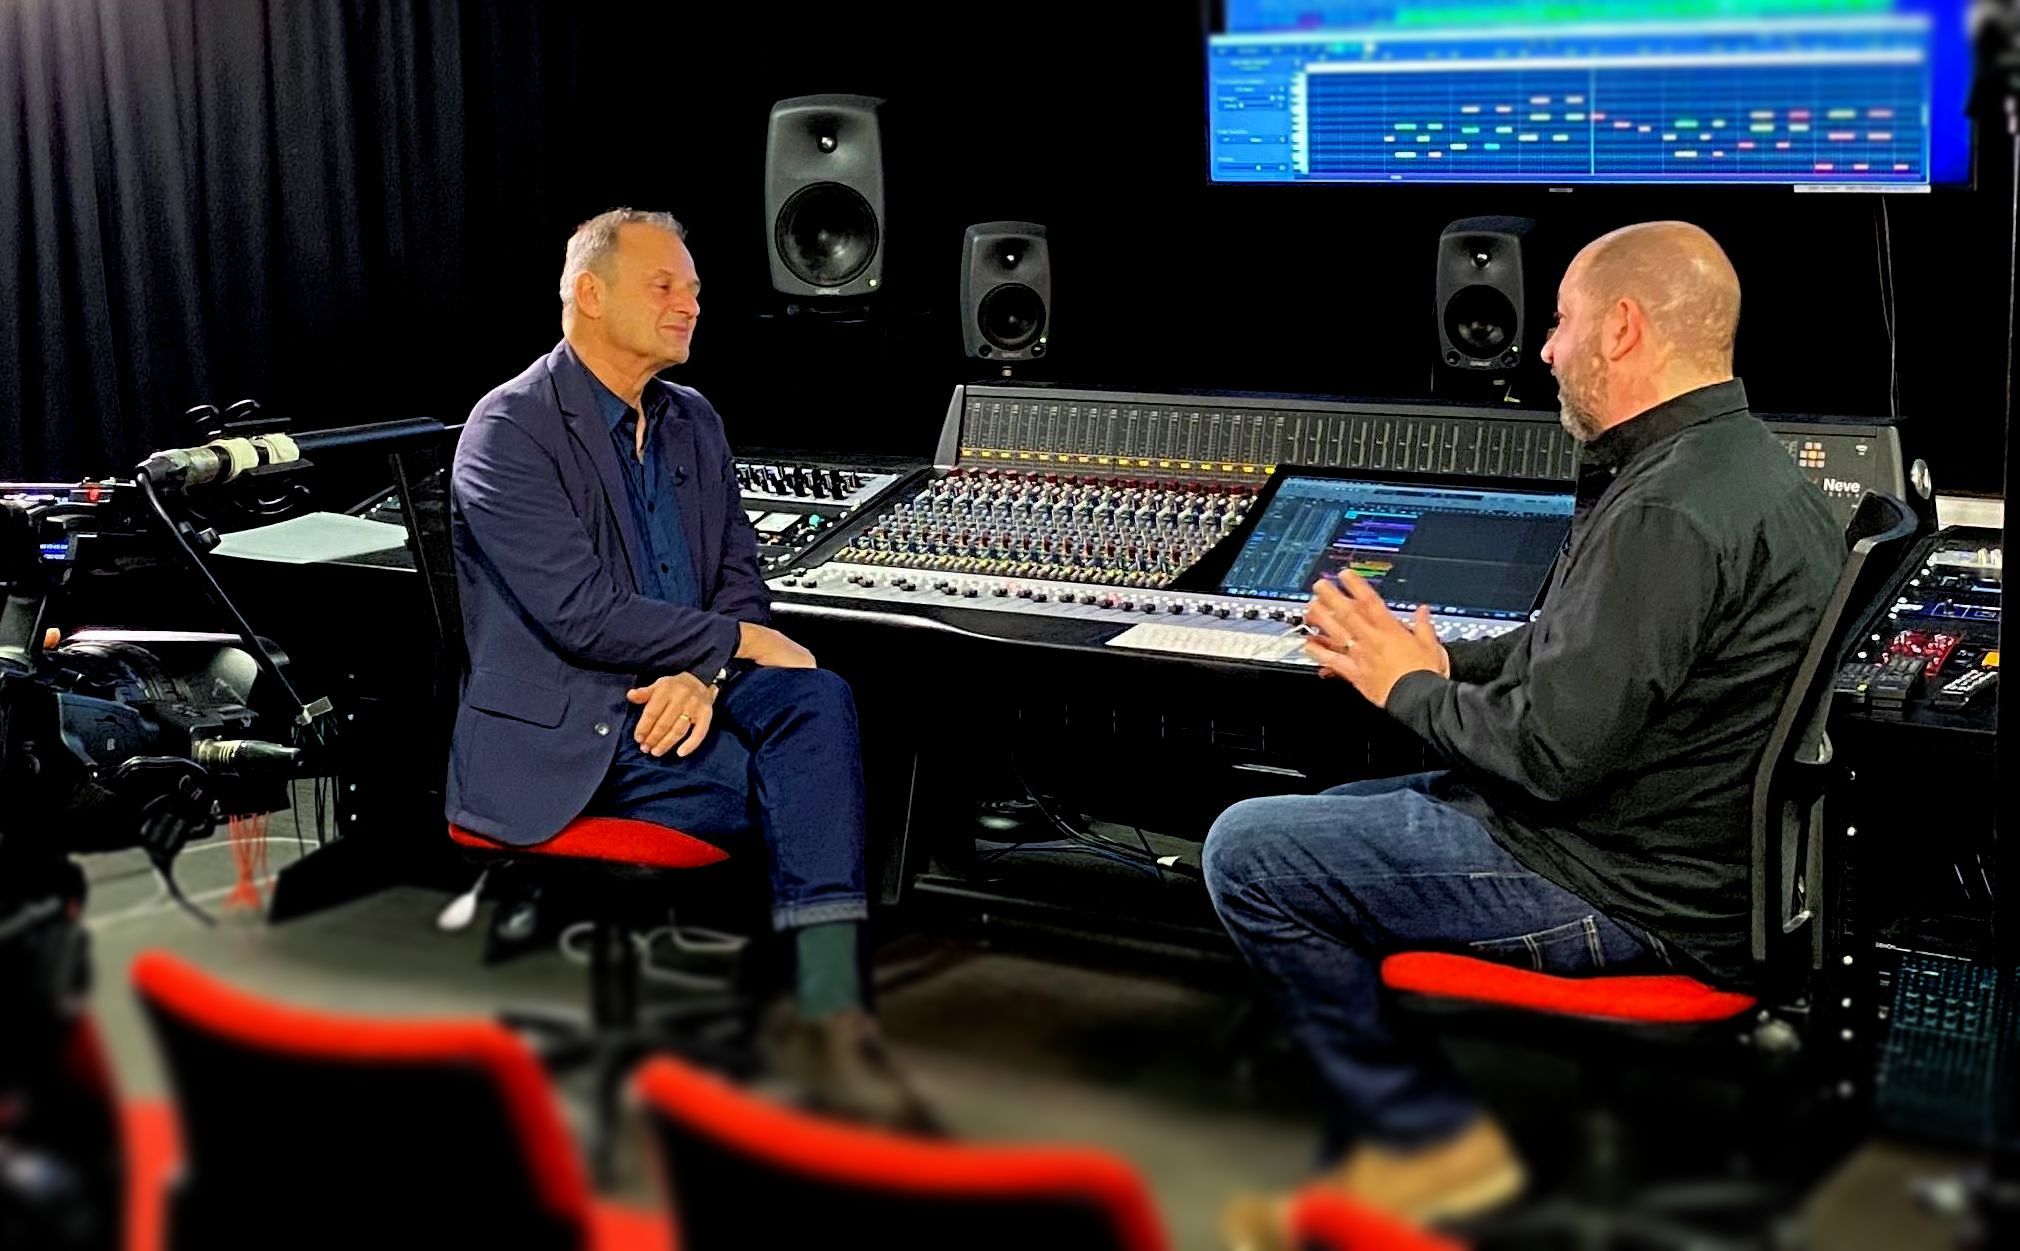 UCLAN’s Genesys Black Console plays a Key Role in Mixing Projects for ‘The Global Sound Movement’